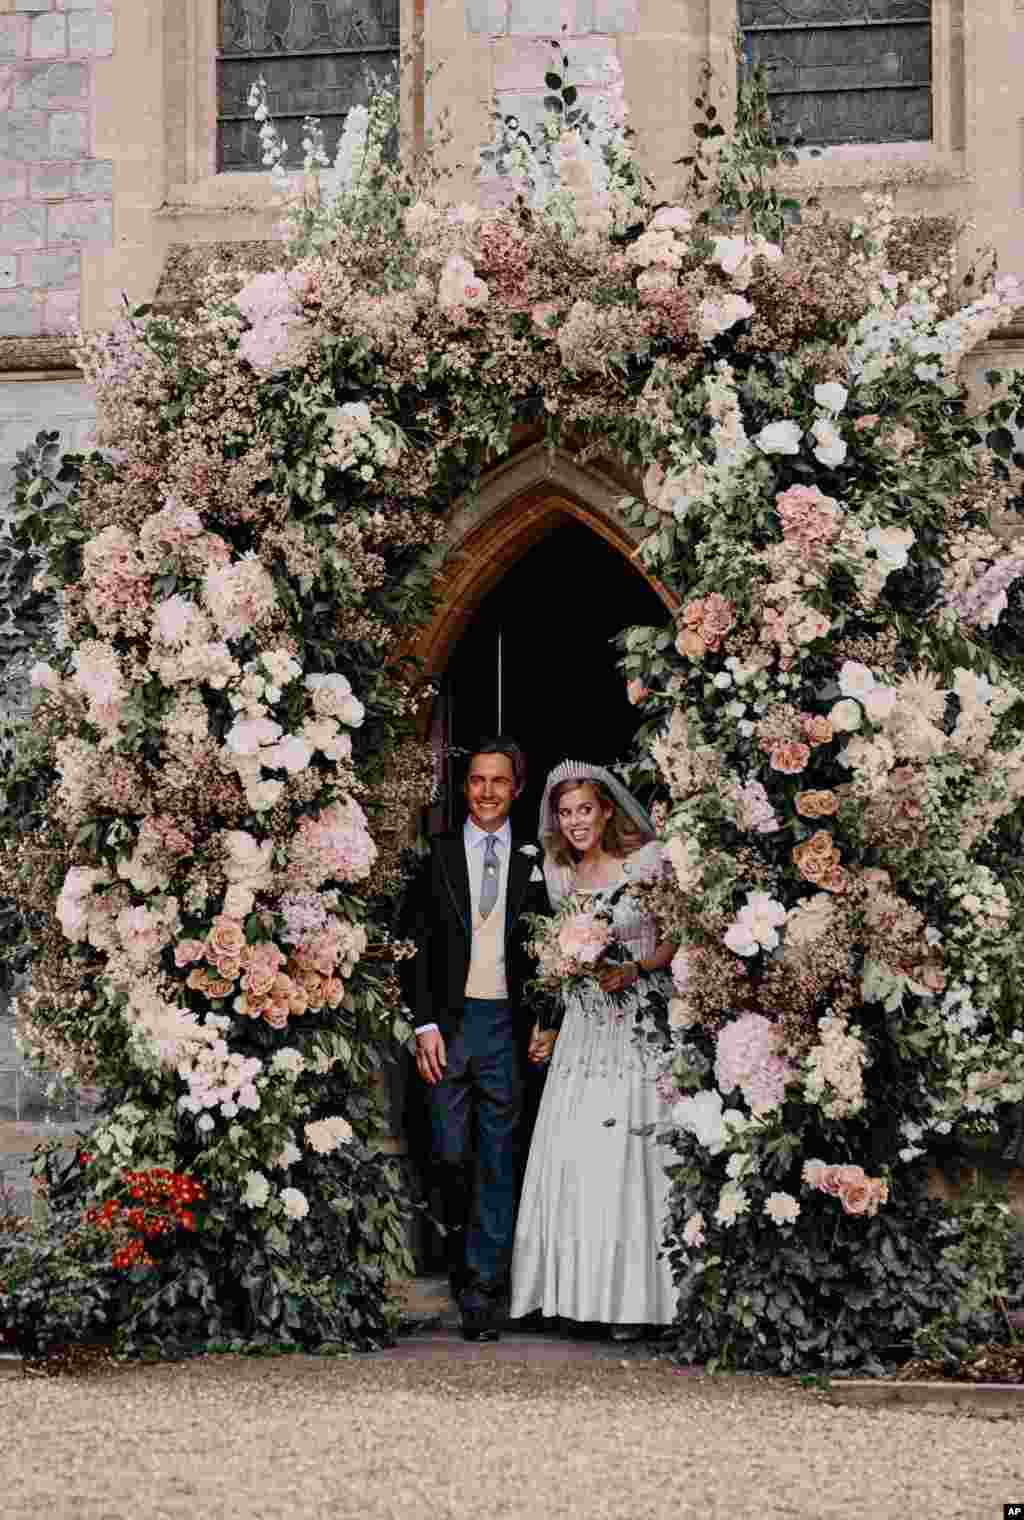 Britain&#39;s Princess Beatrice and Edoardo Mapelli Mozzi leave The Royal Chapel of All Saints at Royal Lodge in Windsor, England, after their wedding, July 18, 2020. (Photo released by the Royal Communications of Princess Beatrice and Edoardo Mapelli Mozzi)